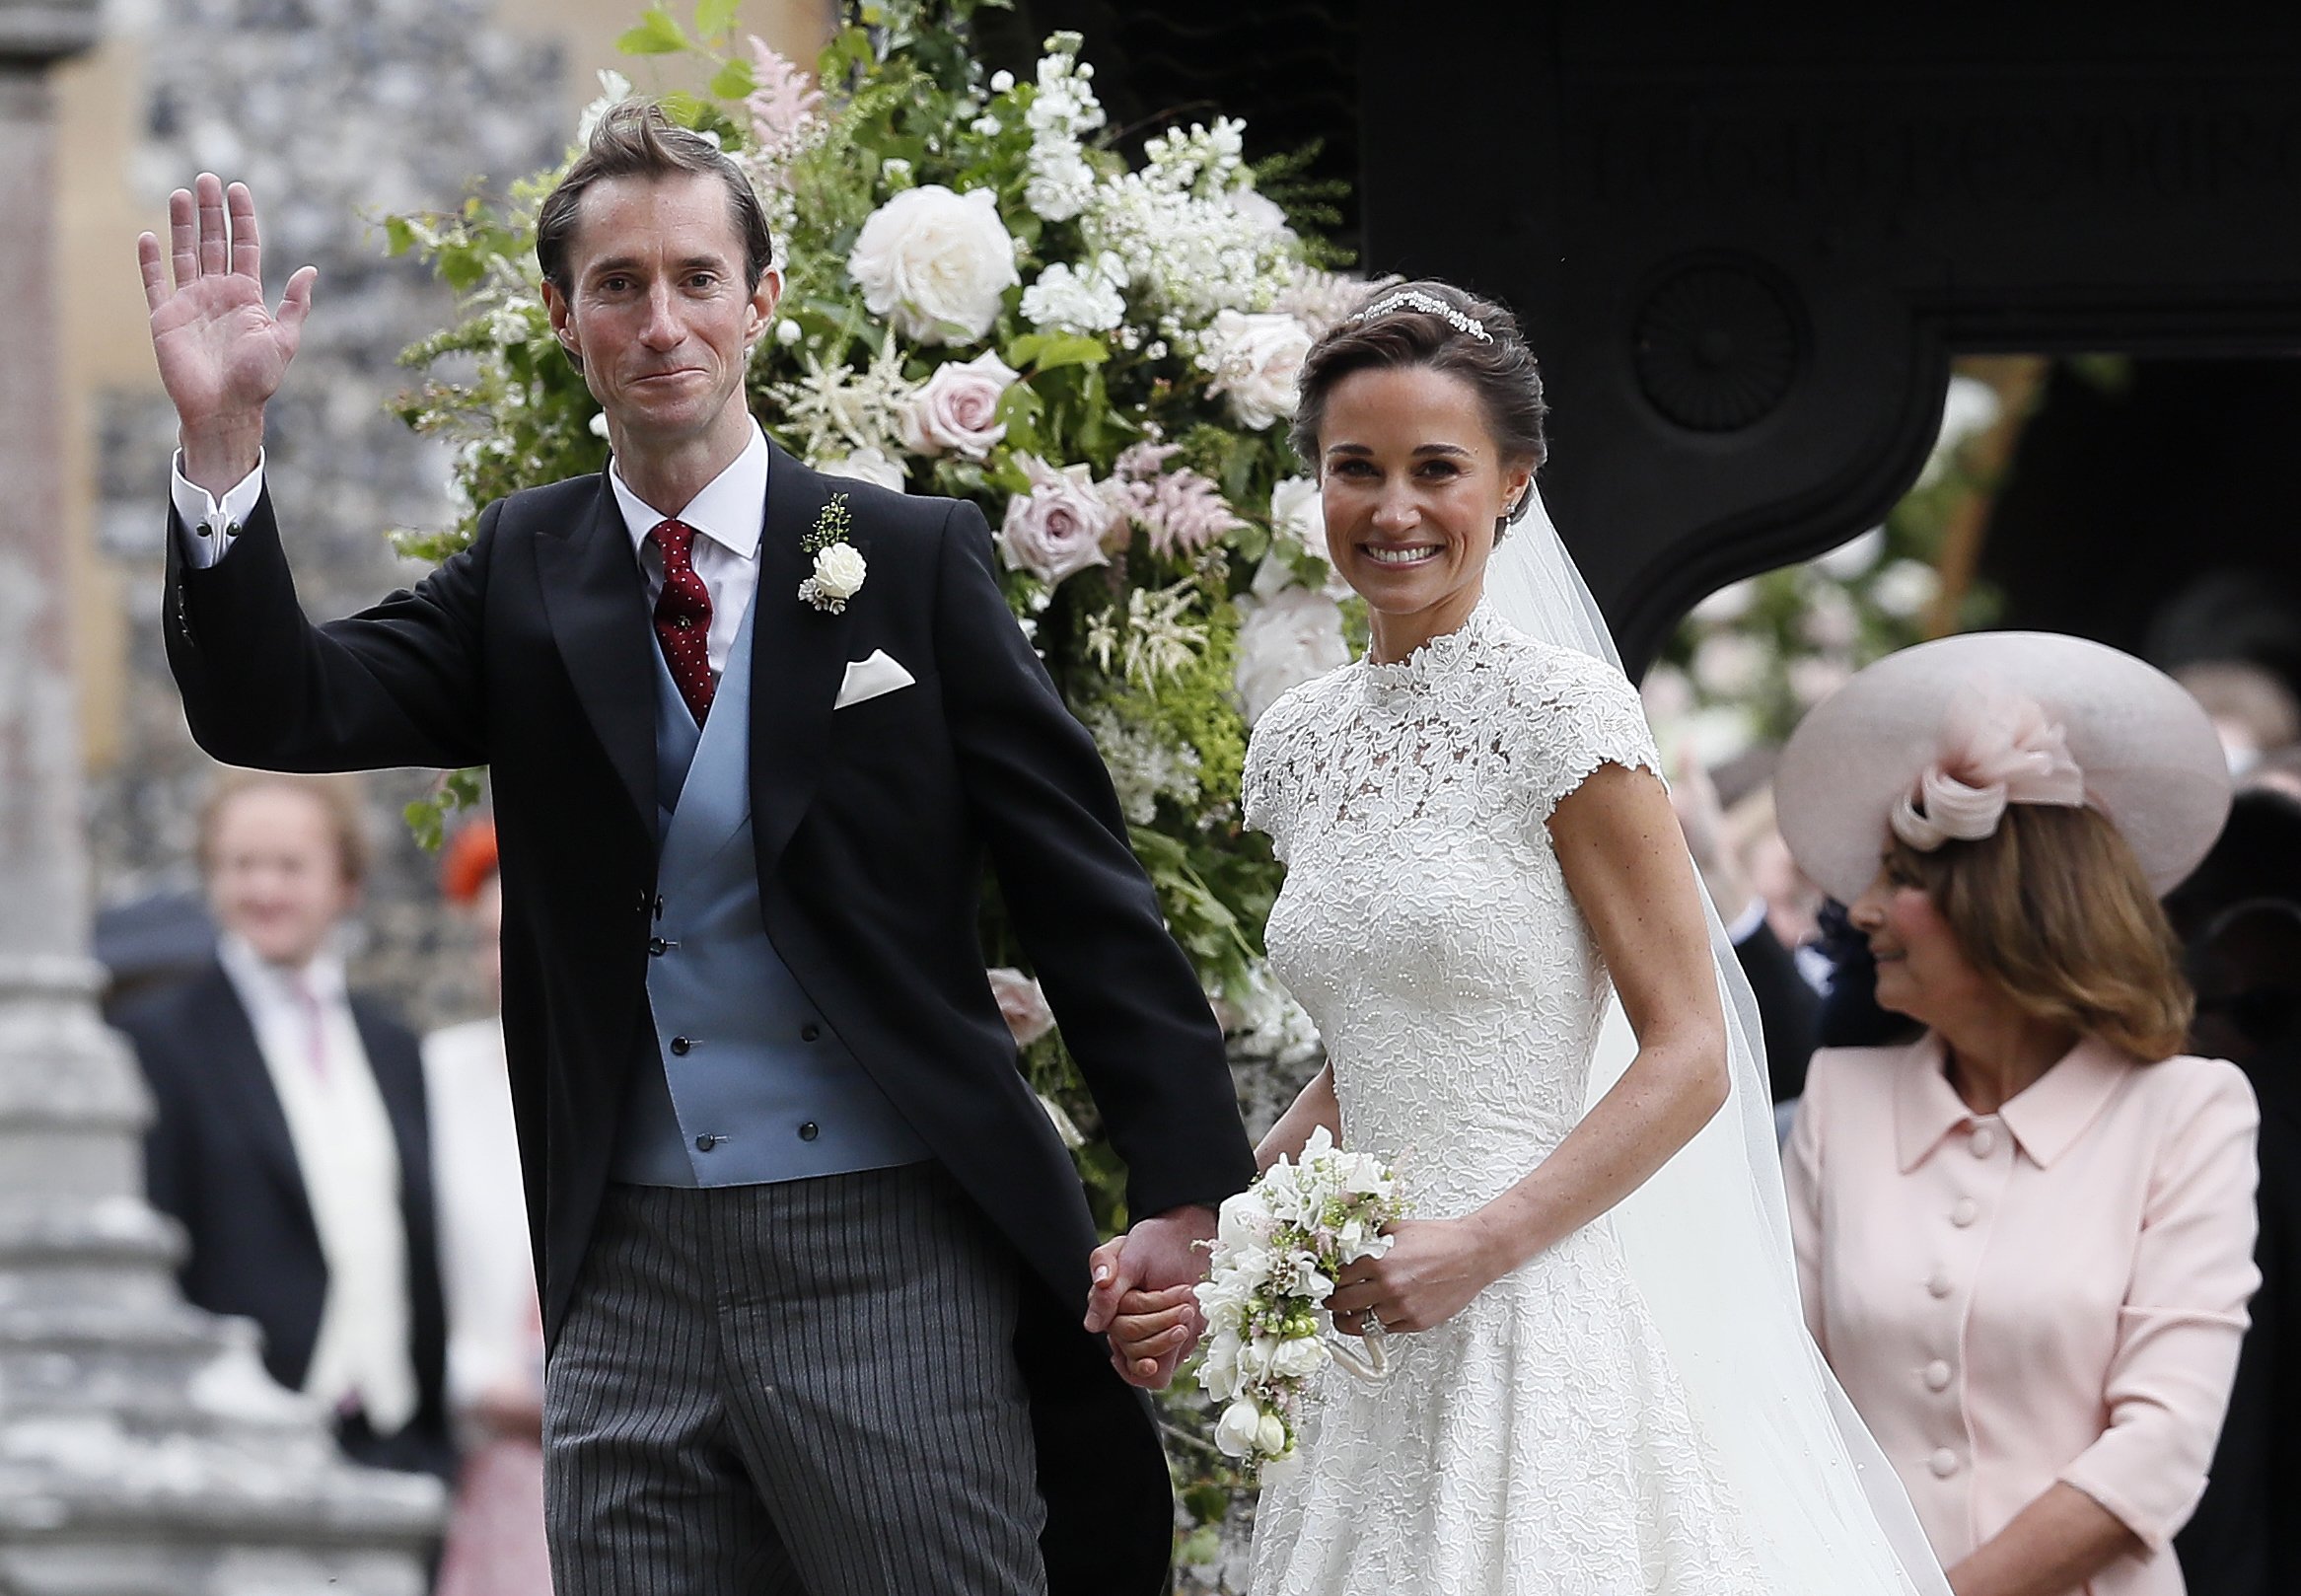 Pippa Middleton and James Matthews after their wedding at St Mark's Church on May 20, 2017 in Englefield, England. | Source: Getty Images